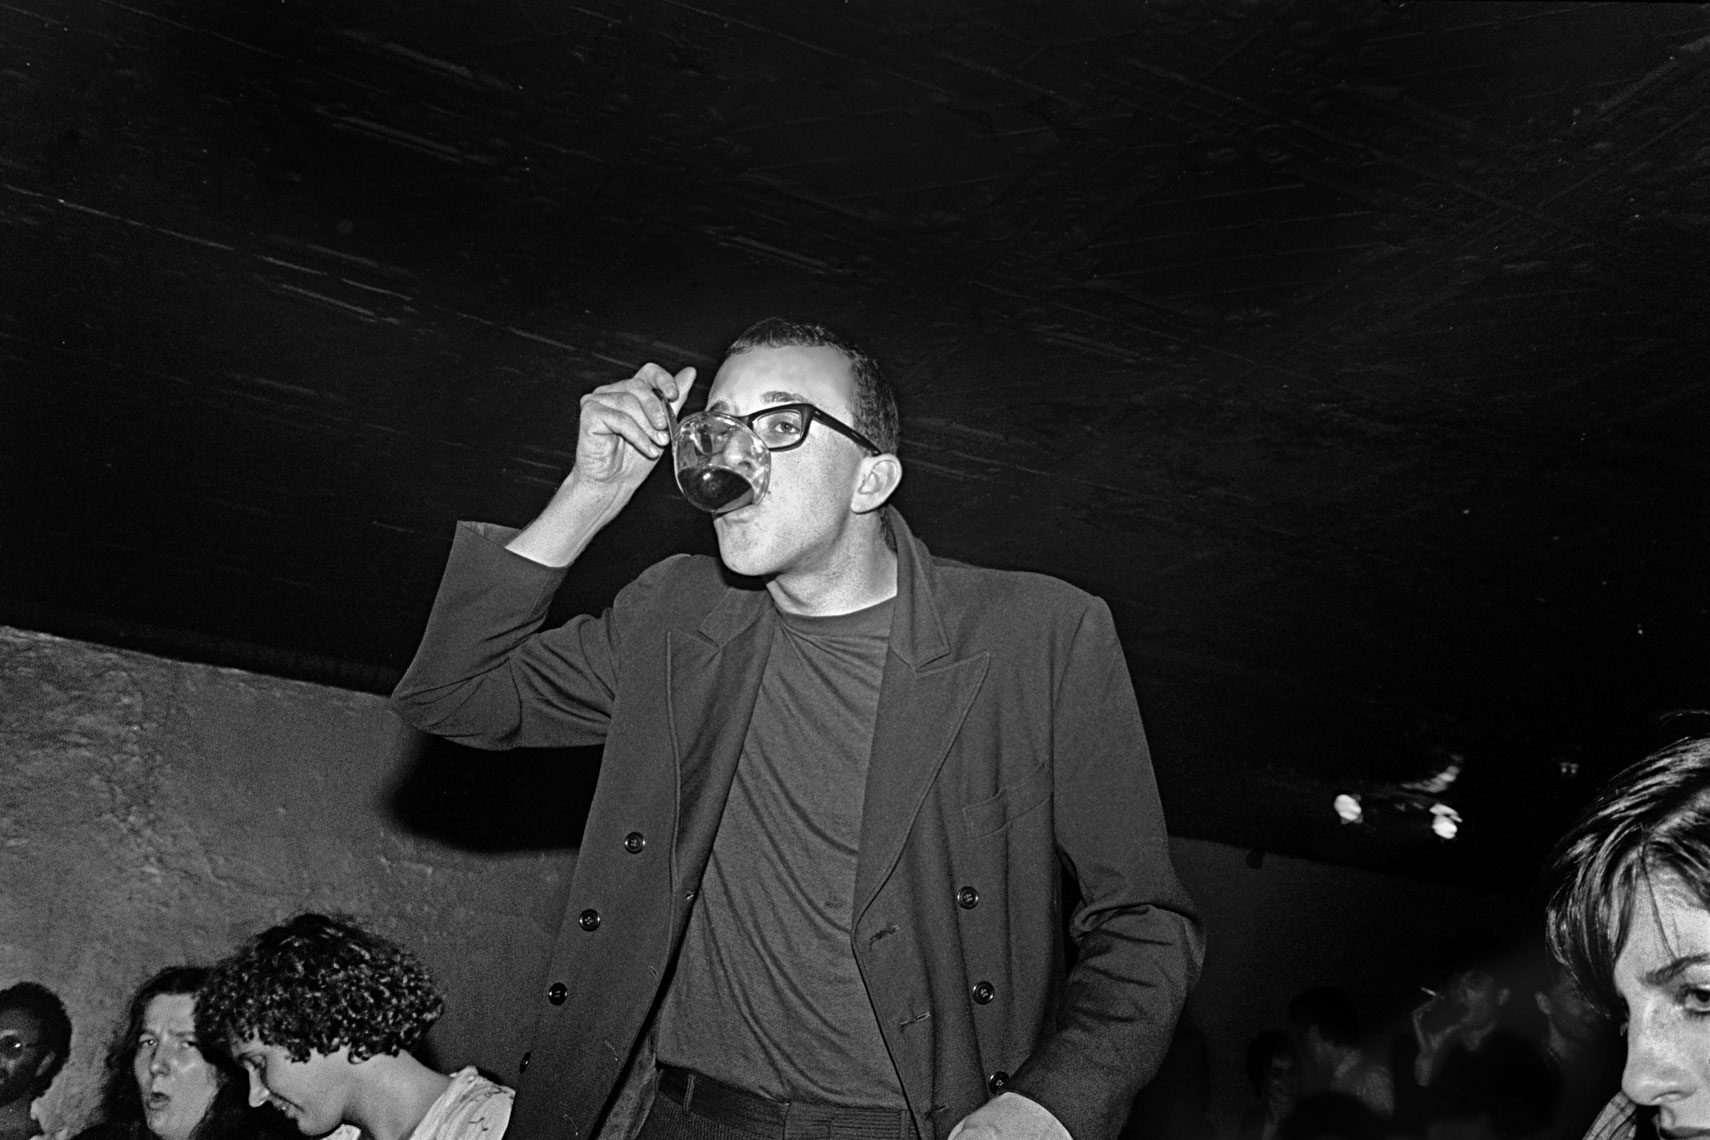 034_Club57_Acts-of-Live-Art_Keith-Haring-drinks-the-Kool-Aid_0680.jpg